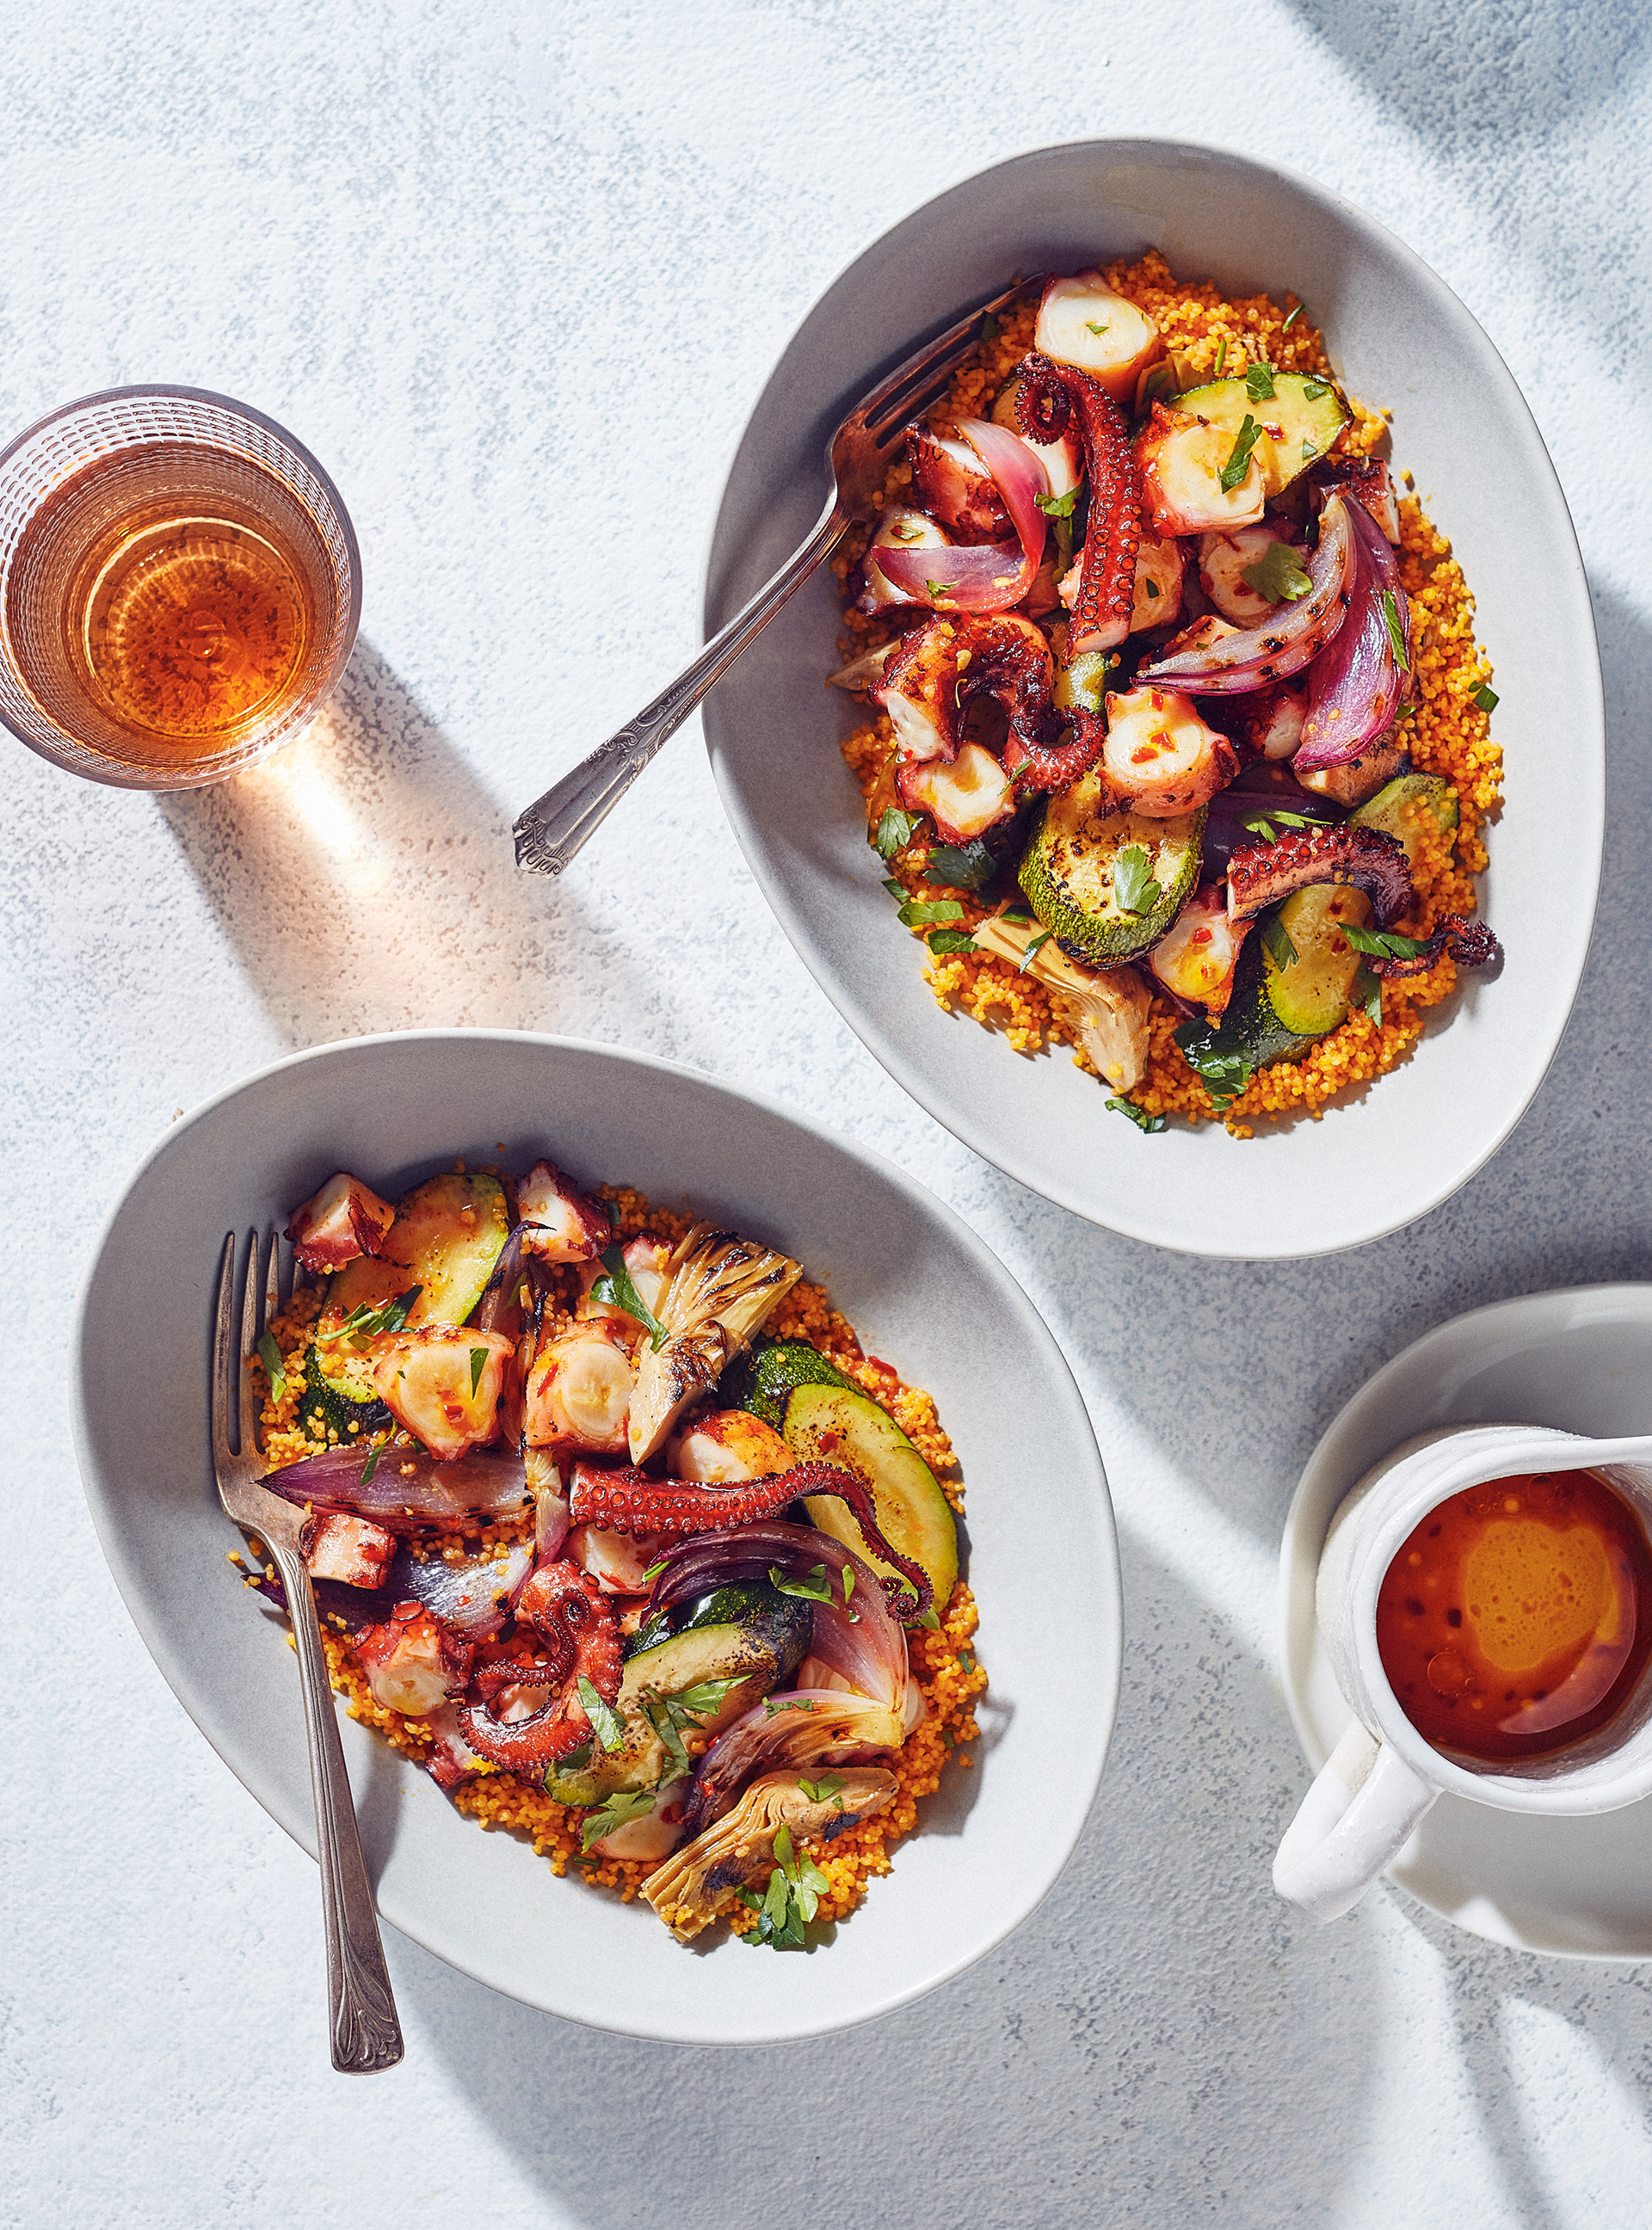 Grilled Octopus and Vegetable Salad with Carrot Juice Couscous